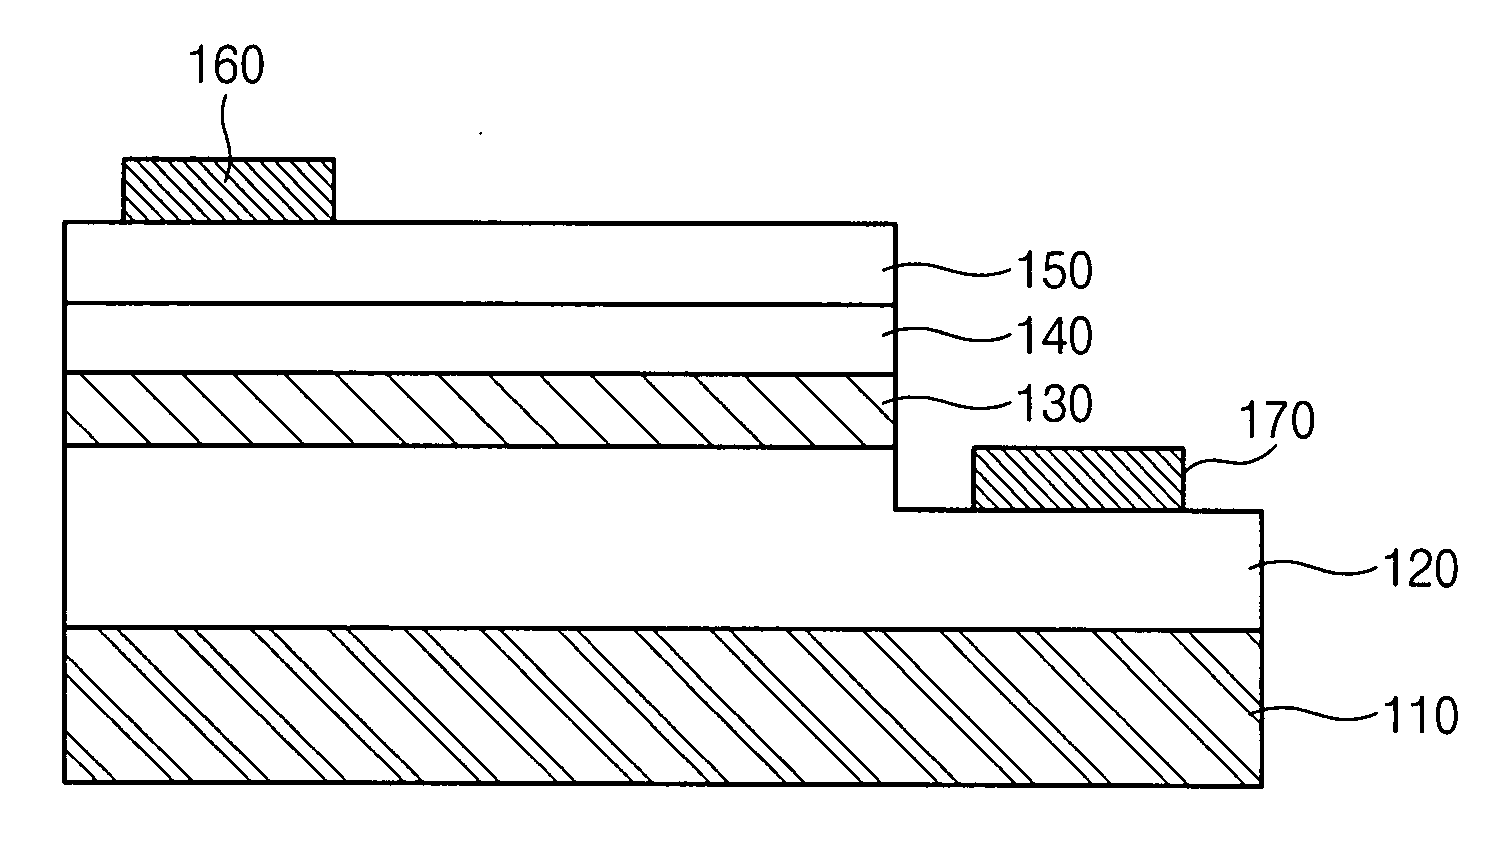 Nitride semiconductor light emitting diode